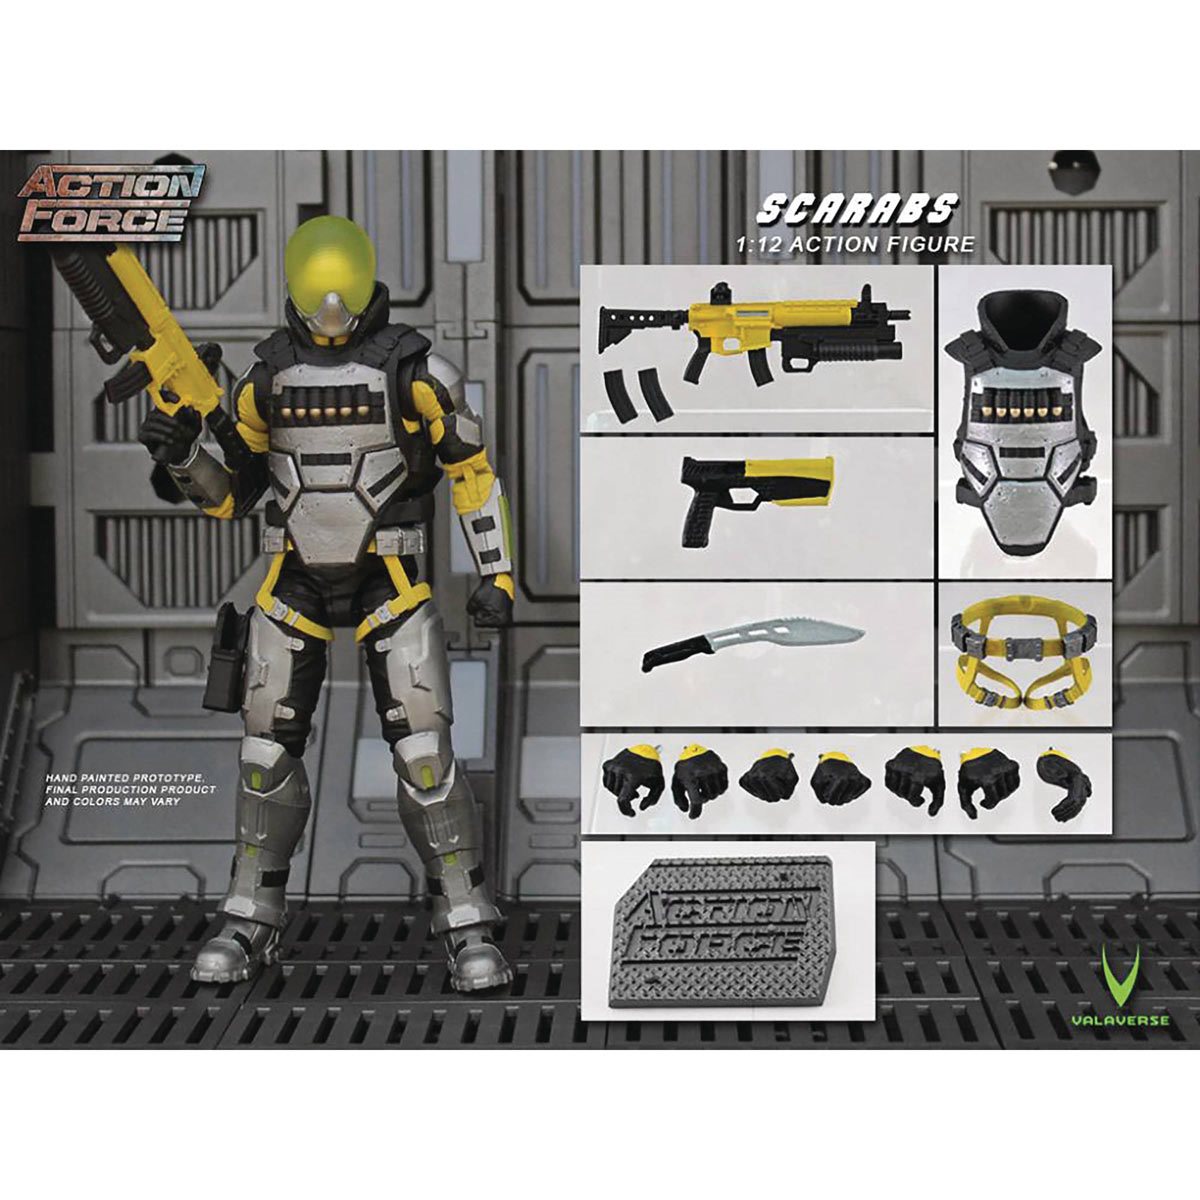 ACTION FORCE - 1:12 (6) Scale Military Action Figures by